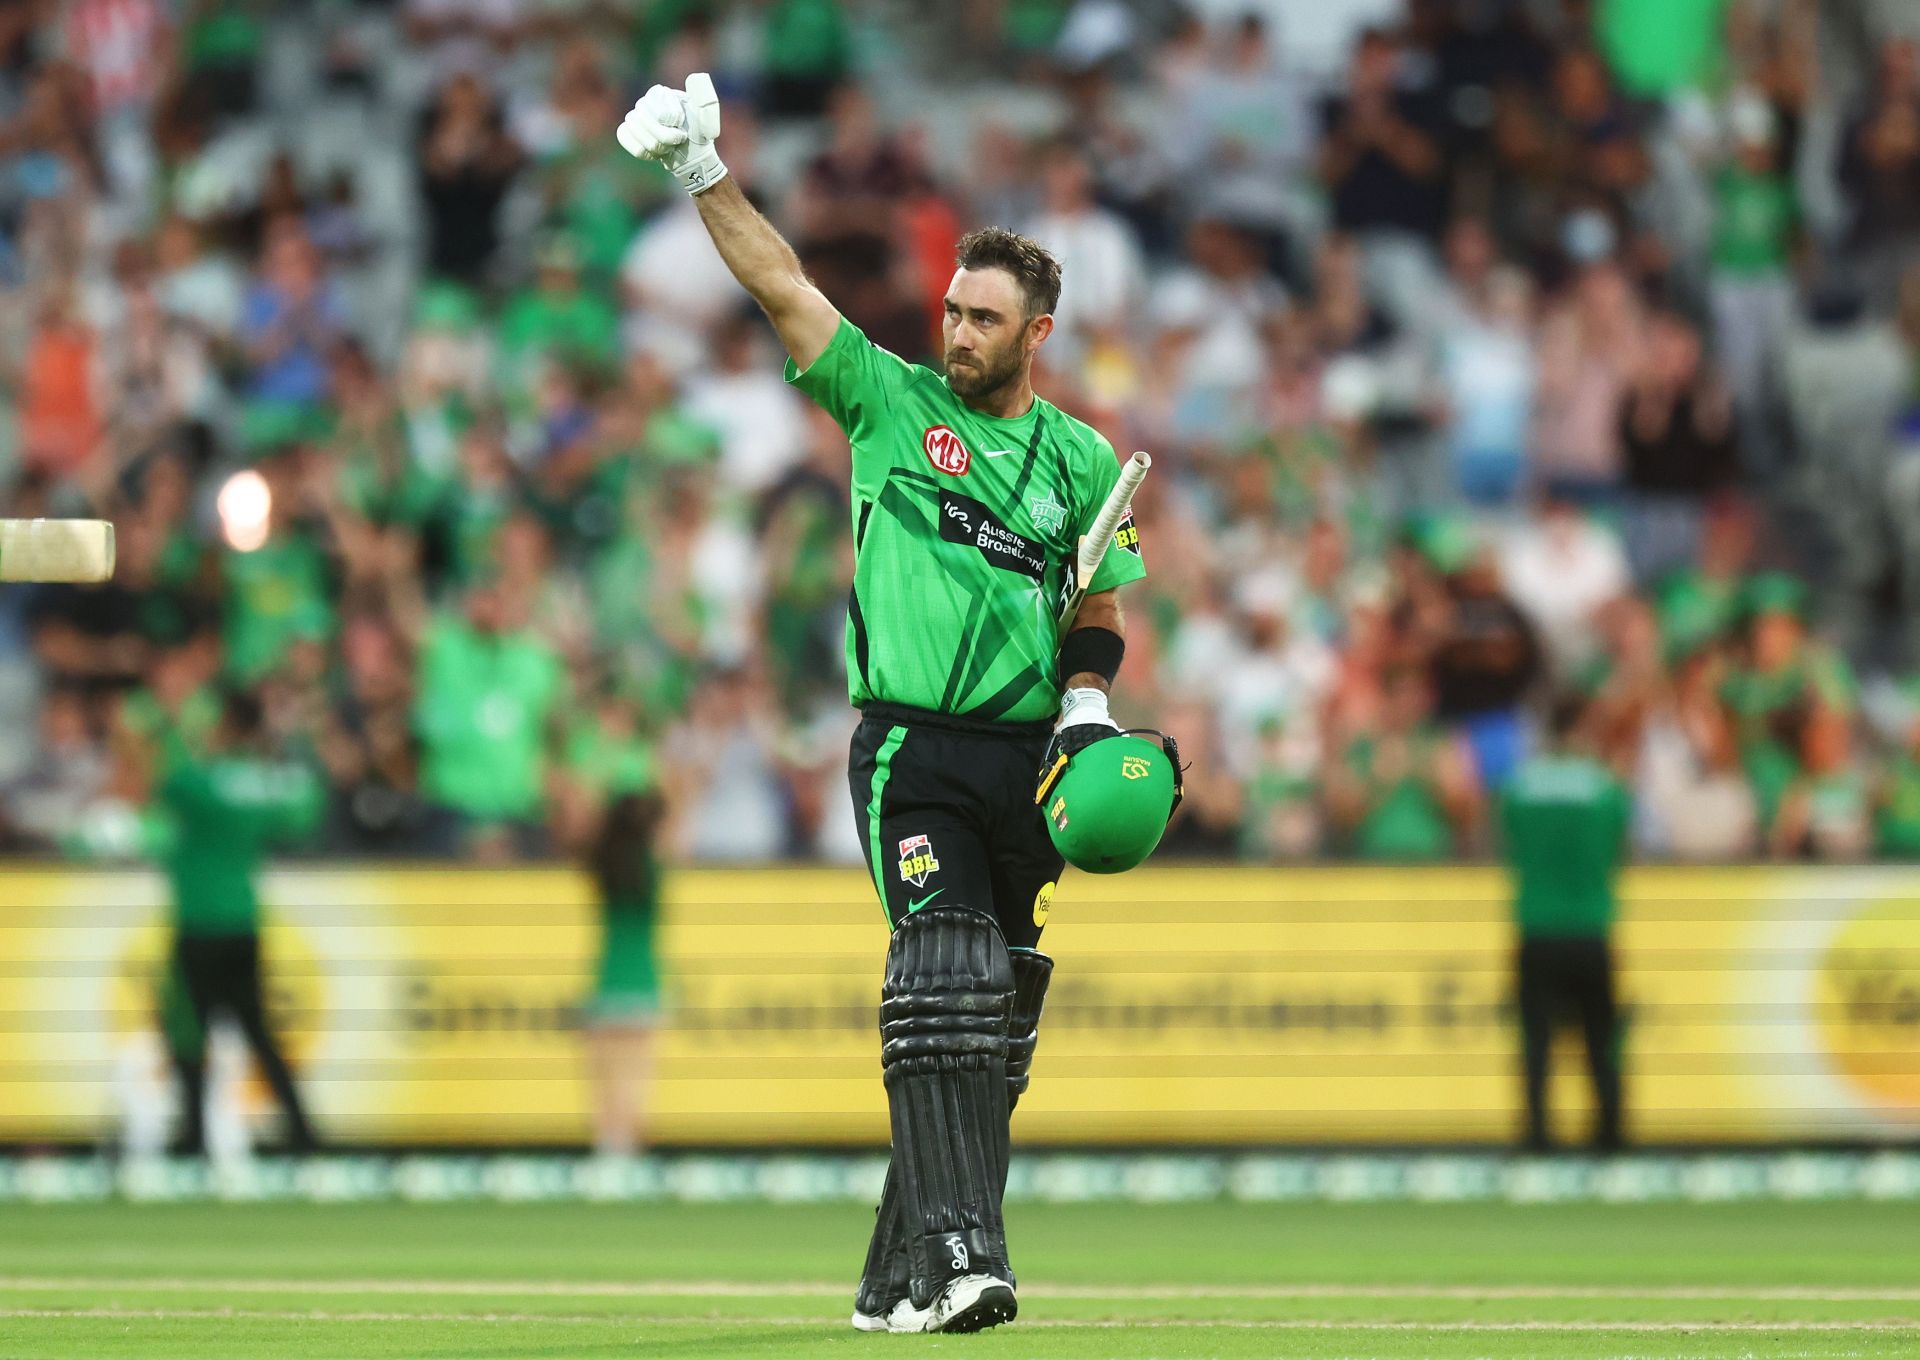 Maxwell became the first player to hit 200 fours for Melbourne Stars